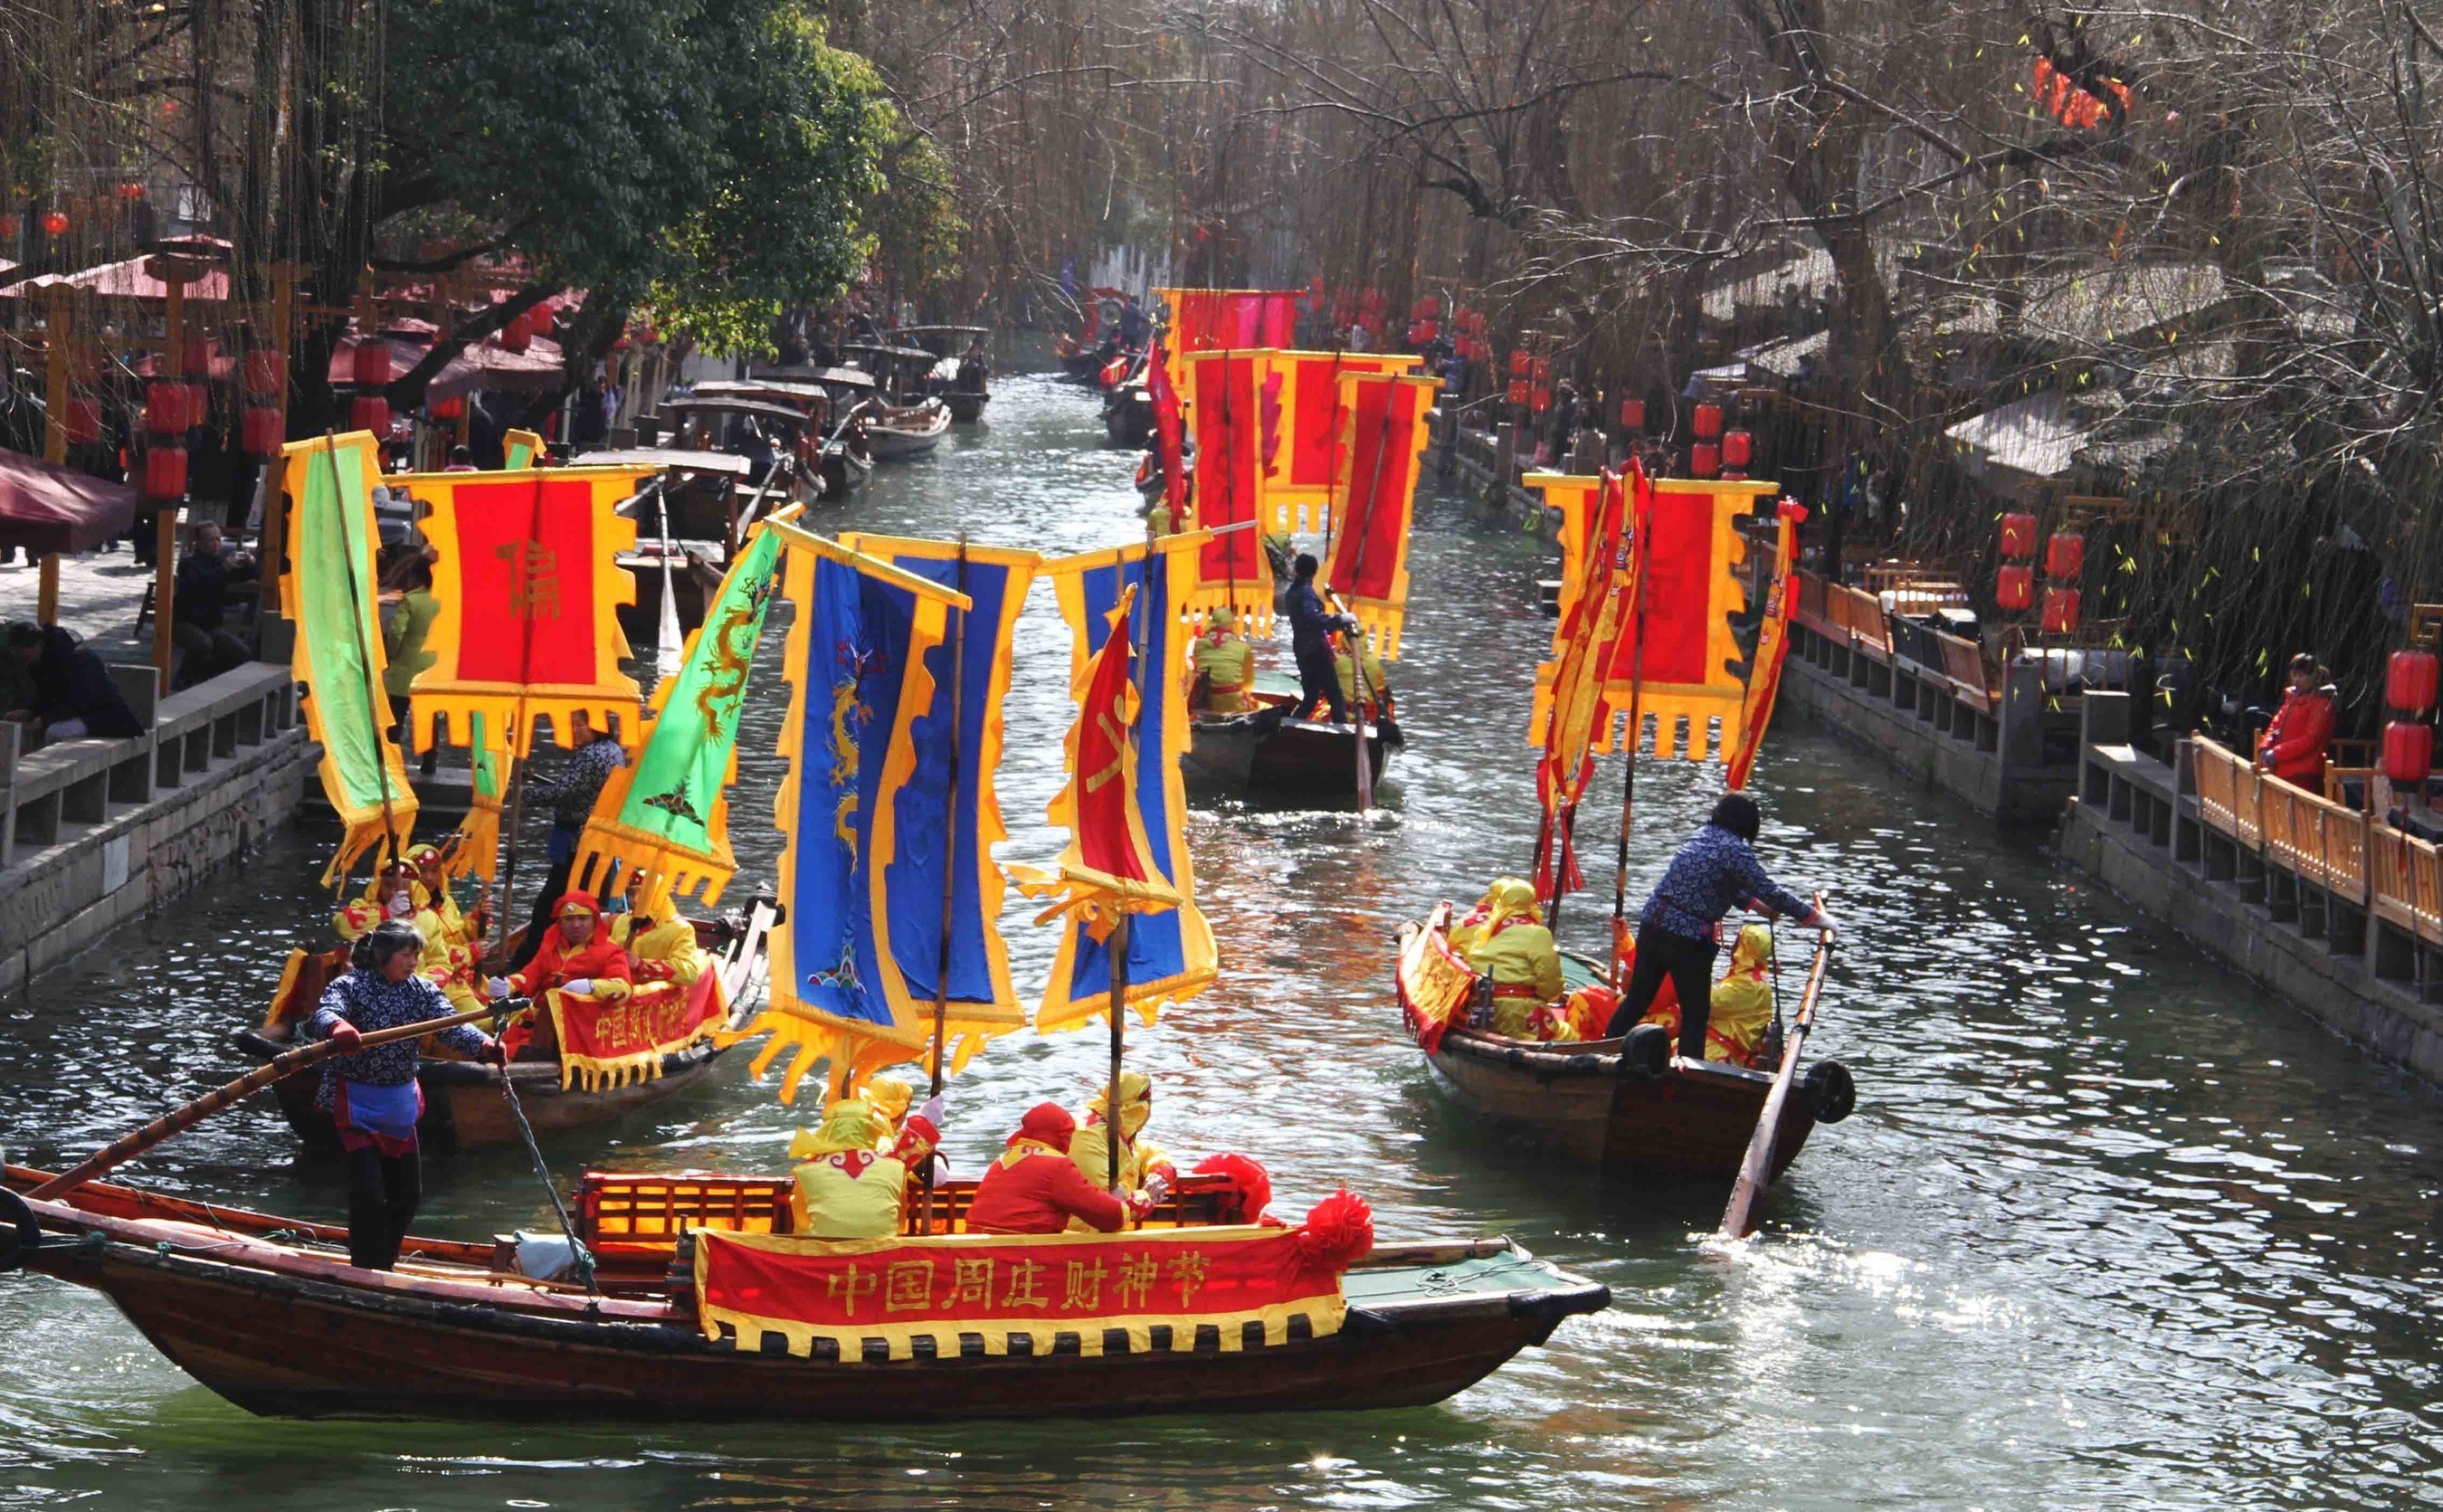 God of Wealth Festival in China's Zhouzhuang